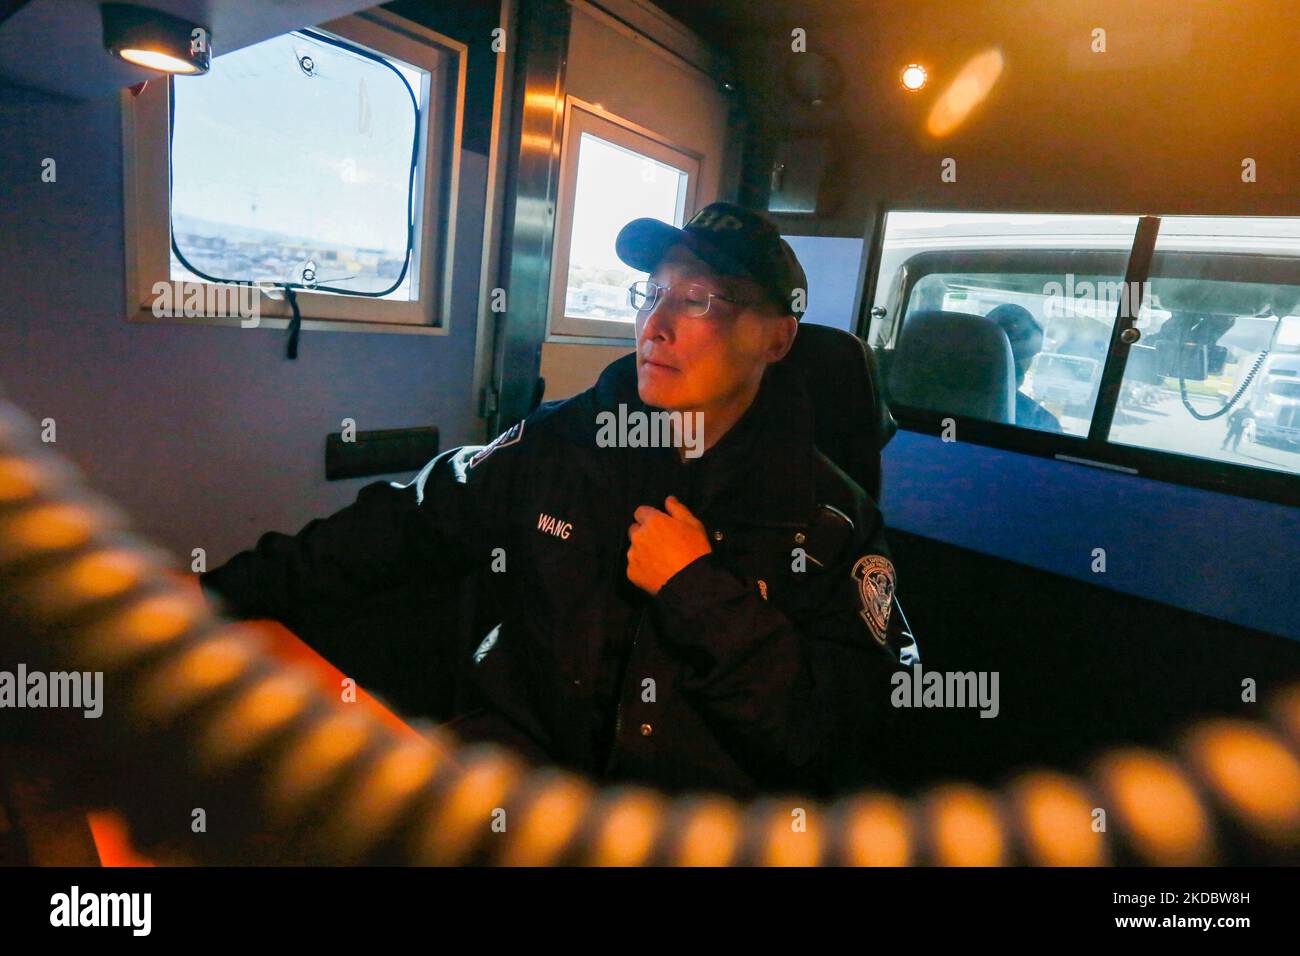 U.S. Customs and Border Protection officer Jim Wang looks over x-ray images of trucks entering Levi's Stadium during non-intrusive inspections prior to Super Bowl 50 in Santa Clara, Calif., Feb. 1, 2016. (U.S. Customs and Border Protection Photo by Glenn Fawcett) Stock Photo